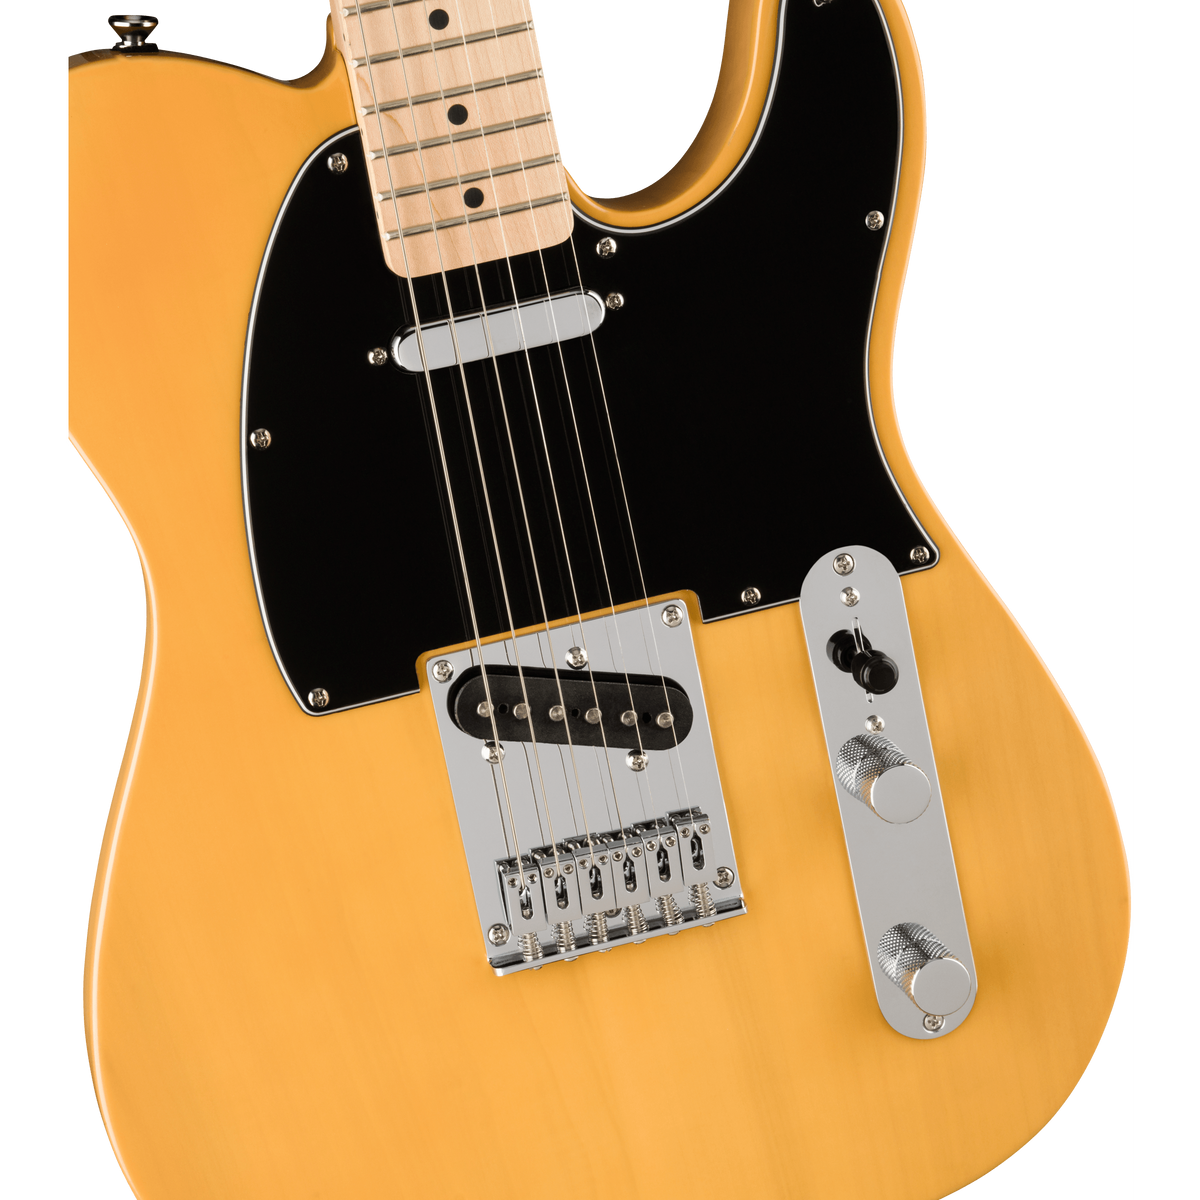 Fender Squier Telecaster Affinity Series Electric Guitar Butterscotch Blonde